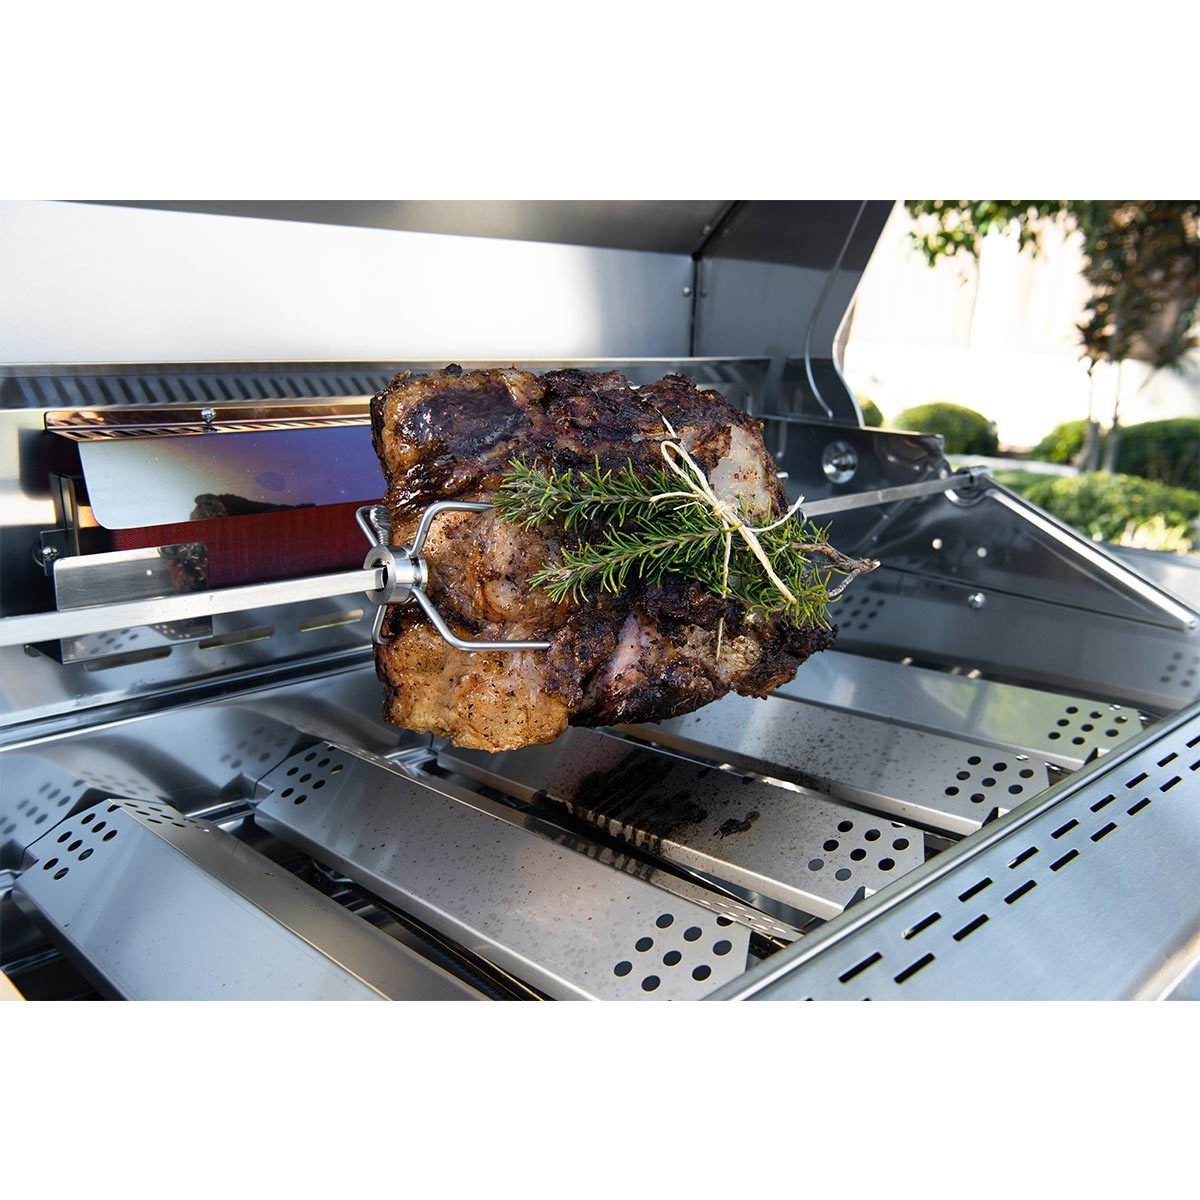 Nexgrill 7 Burner Stainless Steel Gas Barbecue + Side Burner + Rotisserie Kit + Cover - Signature Retail Stores